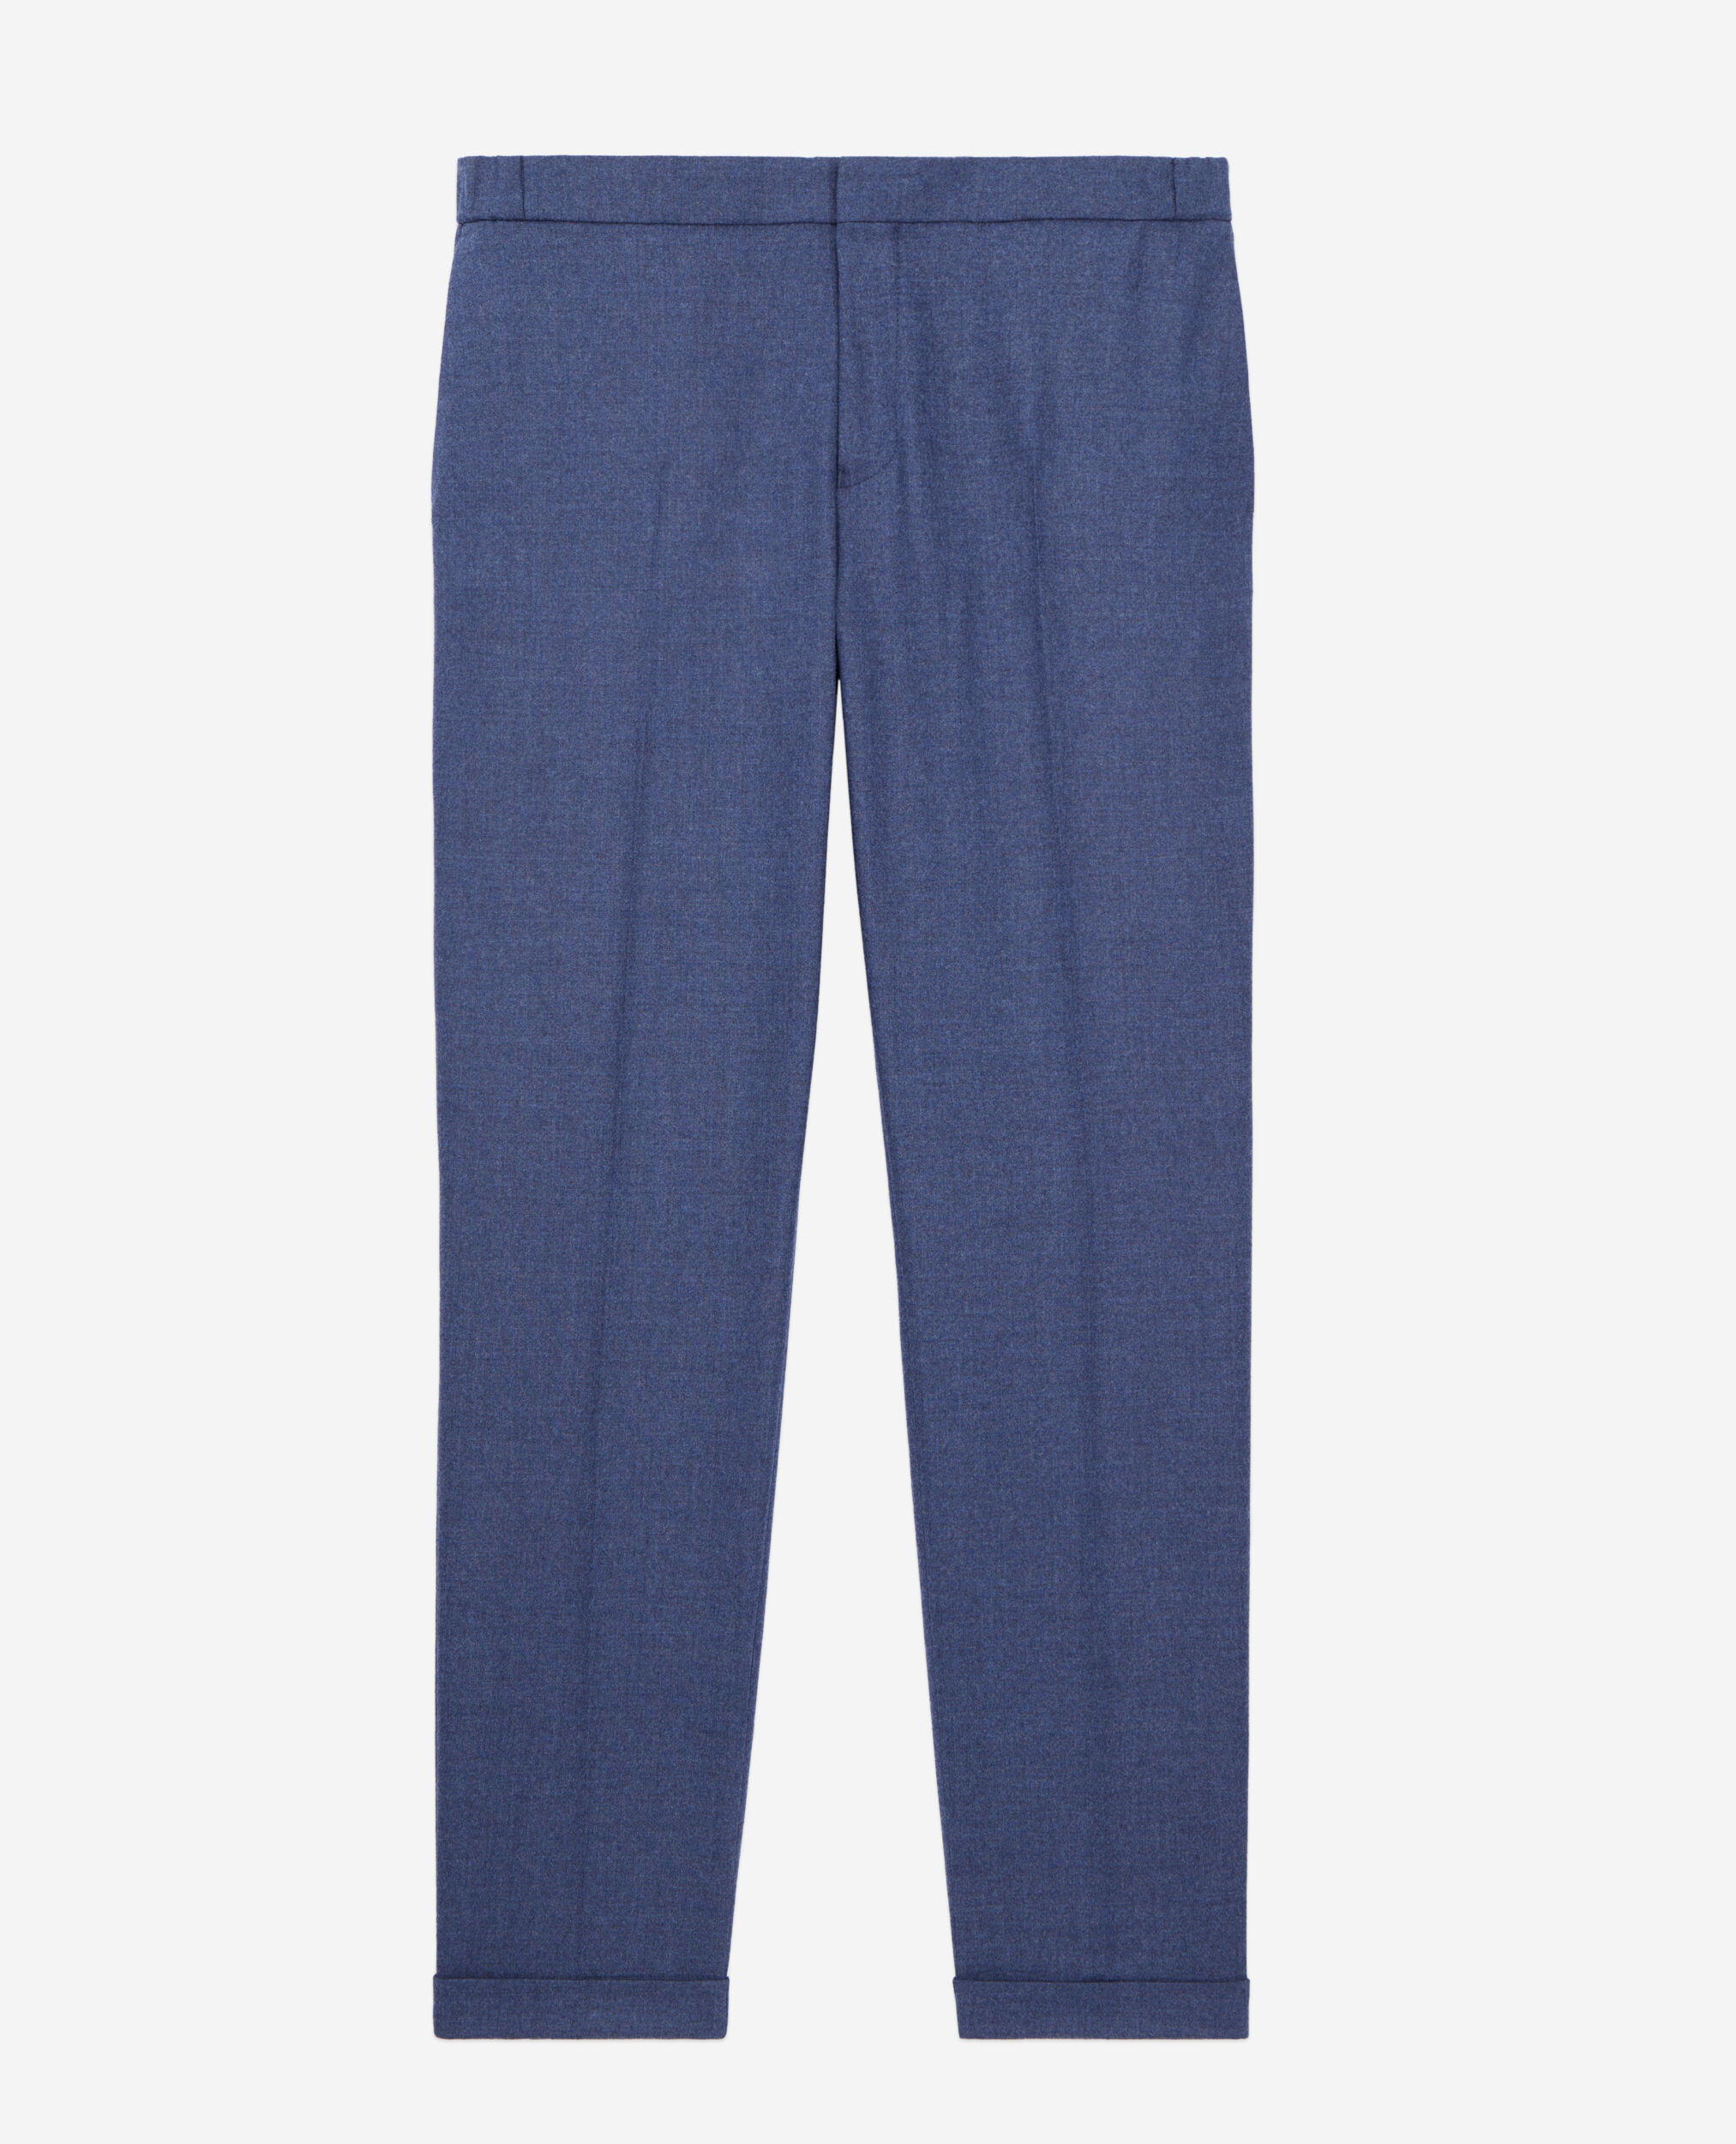 Blue flannel trousers, BLUE, hi-res image number null